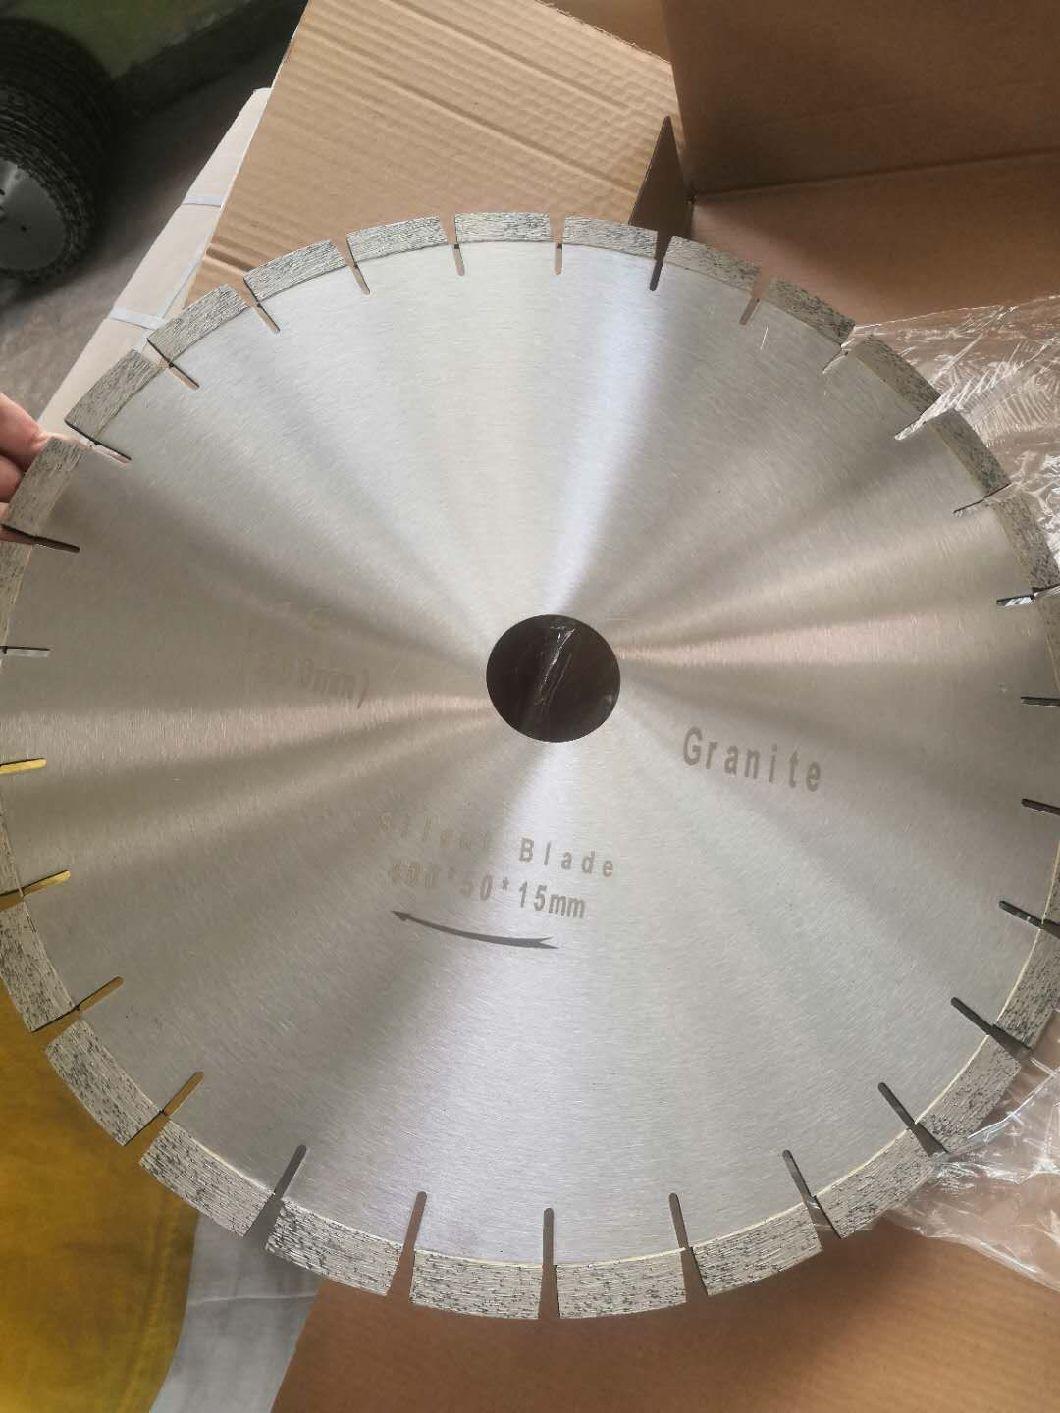 Cold Pressed Segmented Fast Cut Marble Tile Cutting Diamond Saw Blade for Cerami